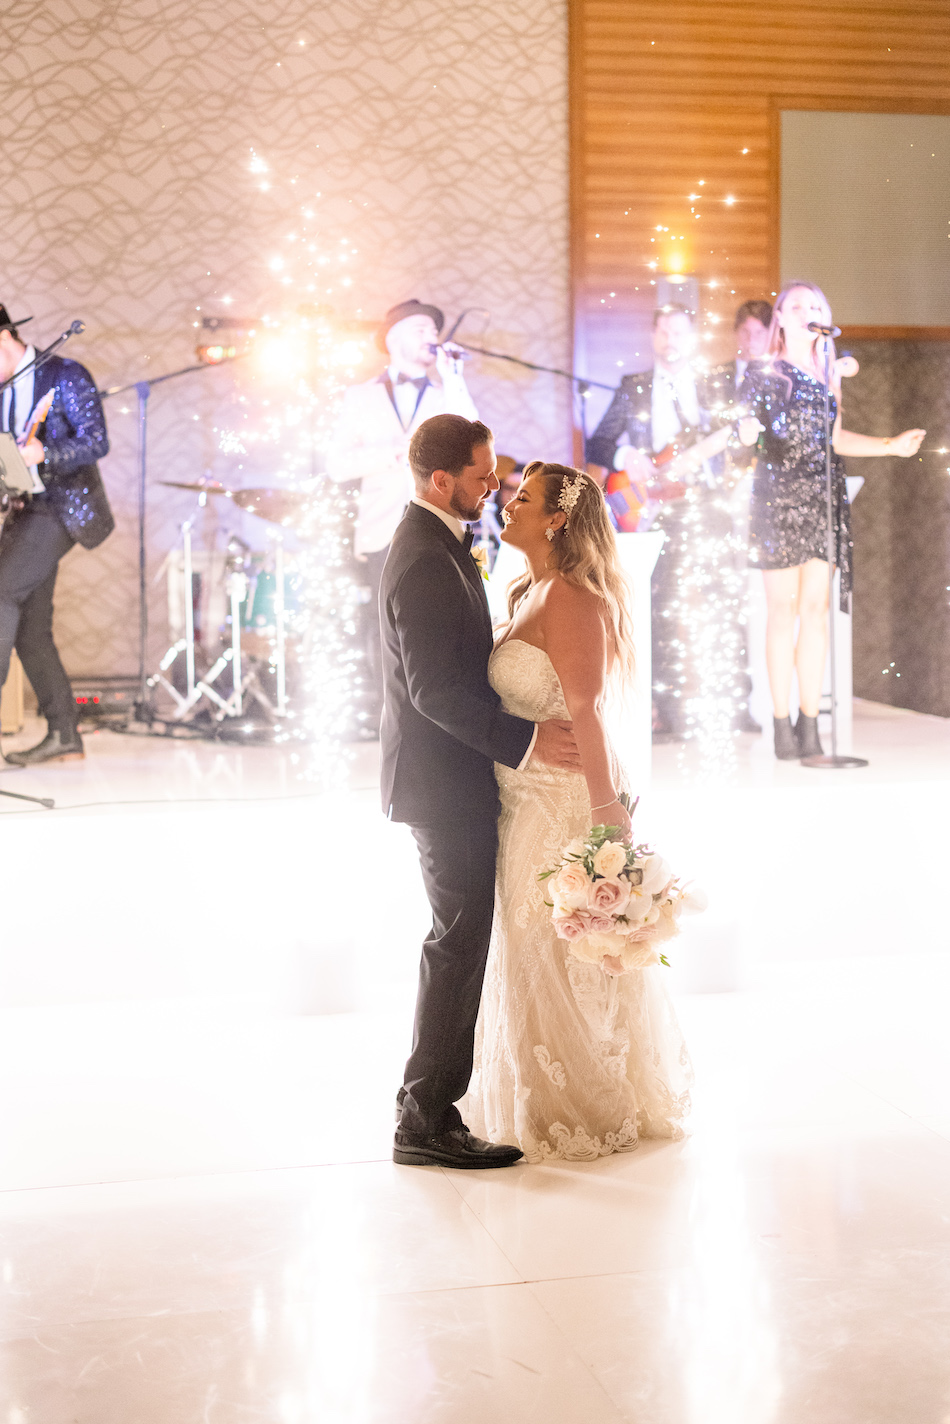 first dance, newlywed dance, bride and groom, floral design, florist, wedding florist, wedding flowers, orange county weddings, orange county wedding florist, orange county florist, orange county floral design, flowers by cina